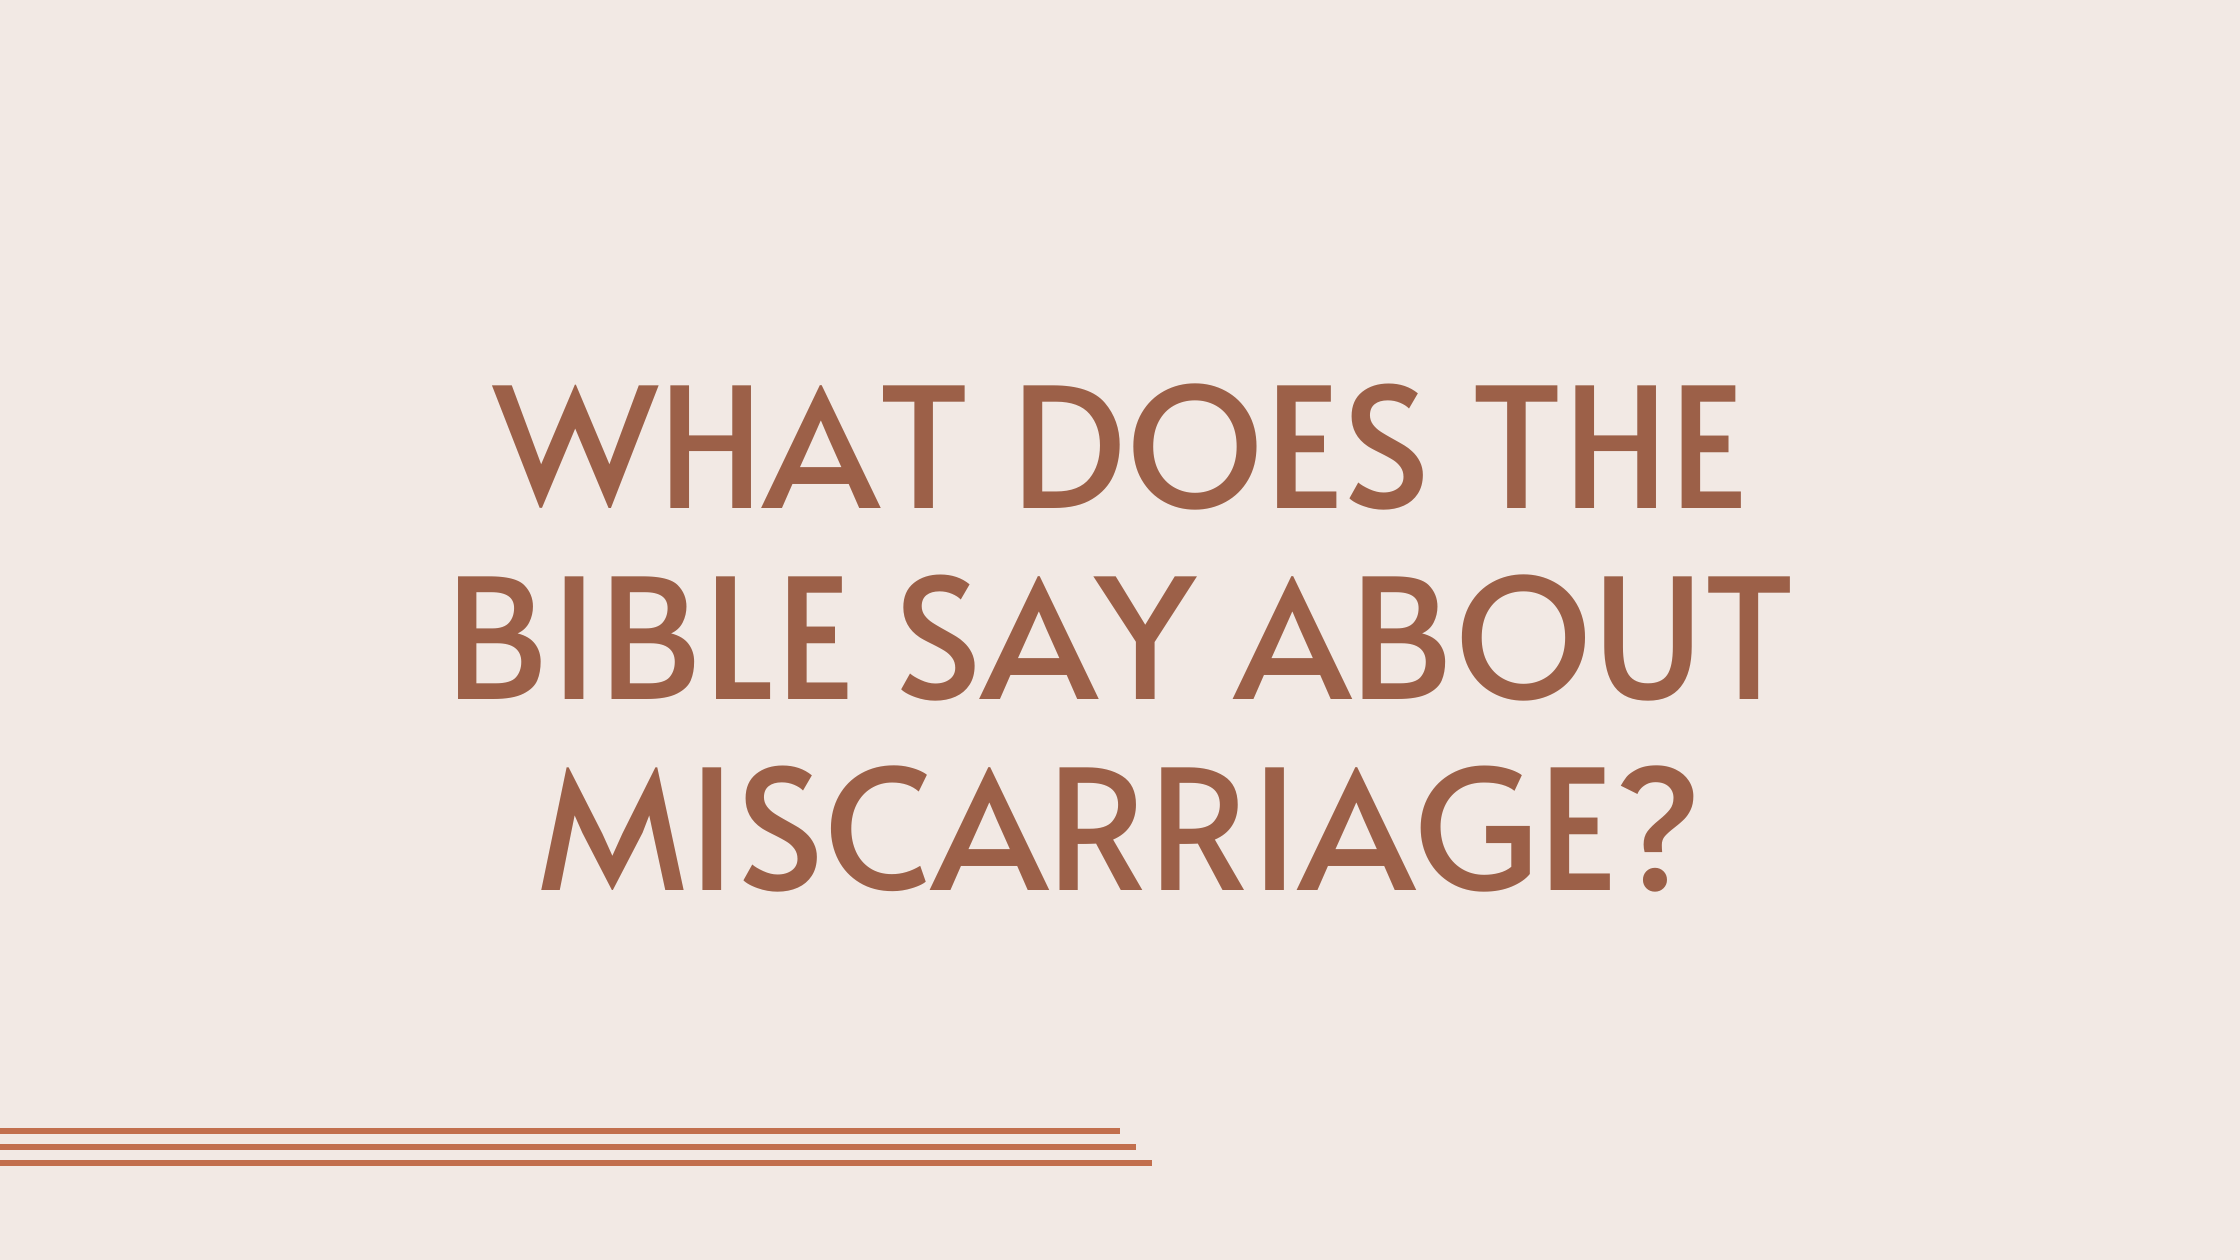 What Does the Bible Say About Miscarriage